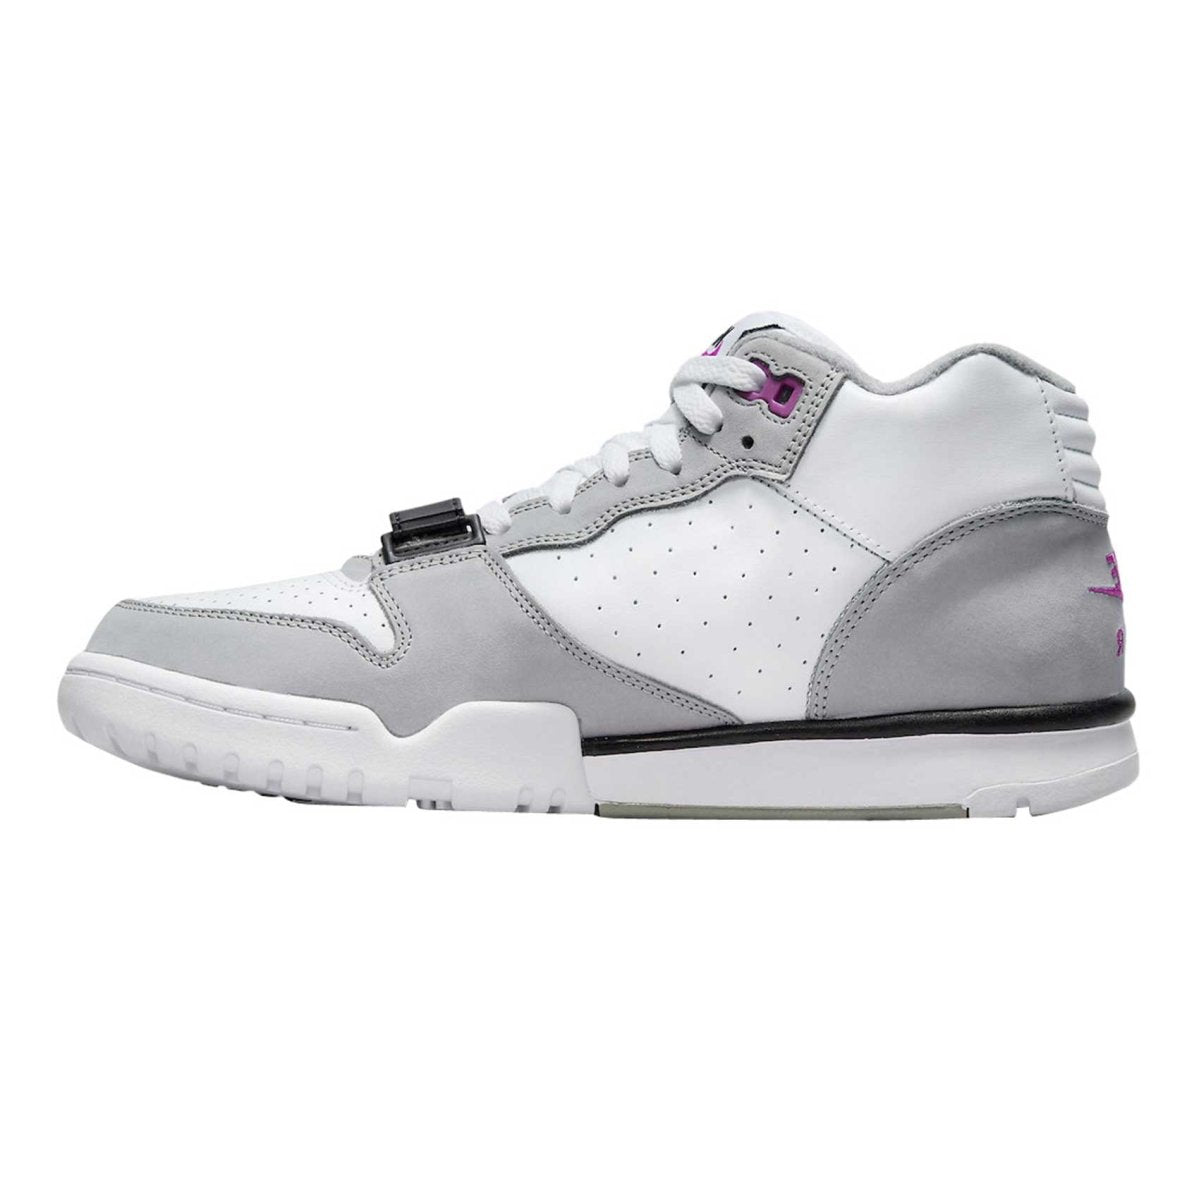 Nike Men's Air Trainer 1 White/Purple - 10034070 - West NYC